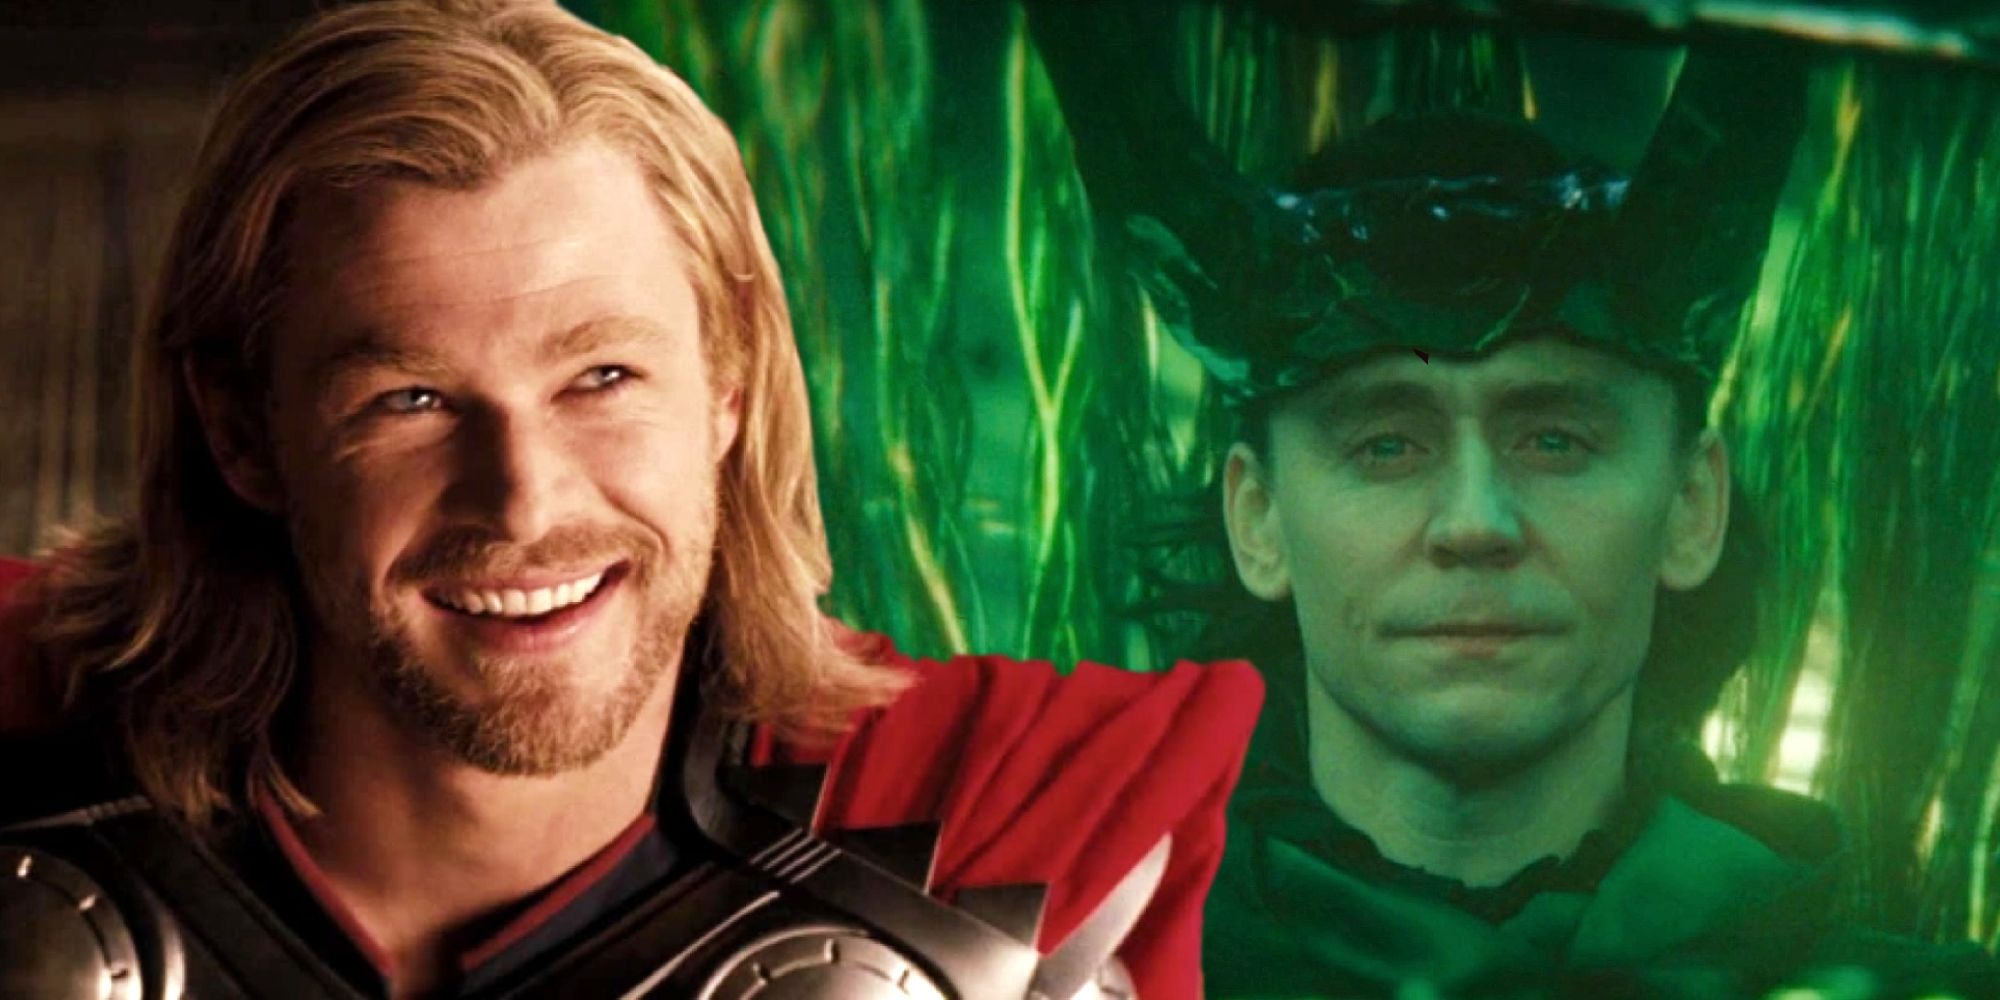 Loki as the God of Stories from Loki season 2, episode 6's ending next to Thor smiling from the 2011 movie